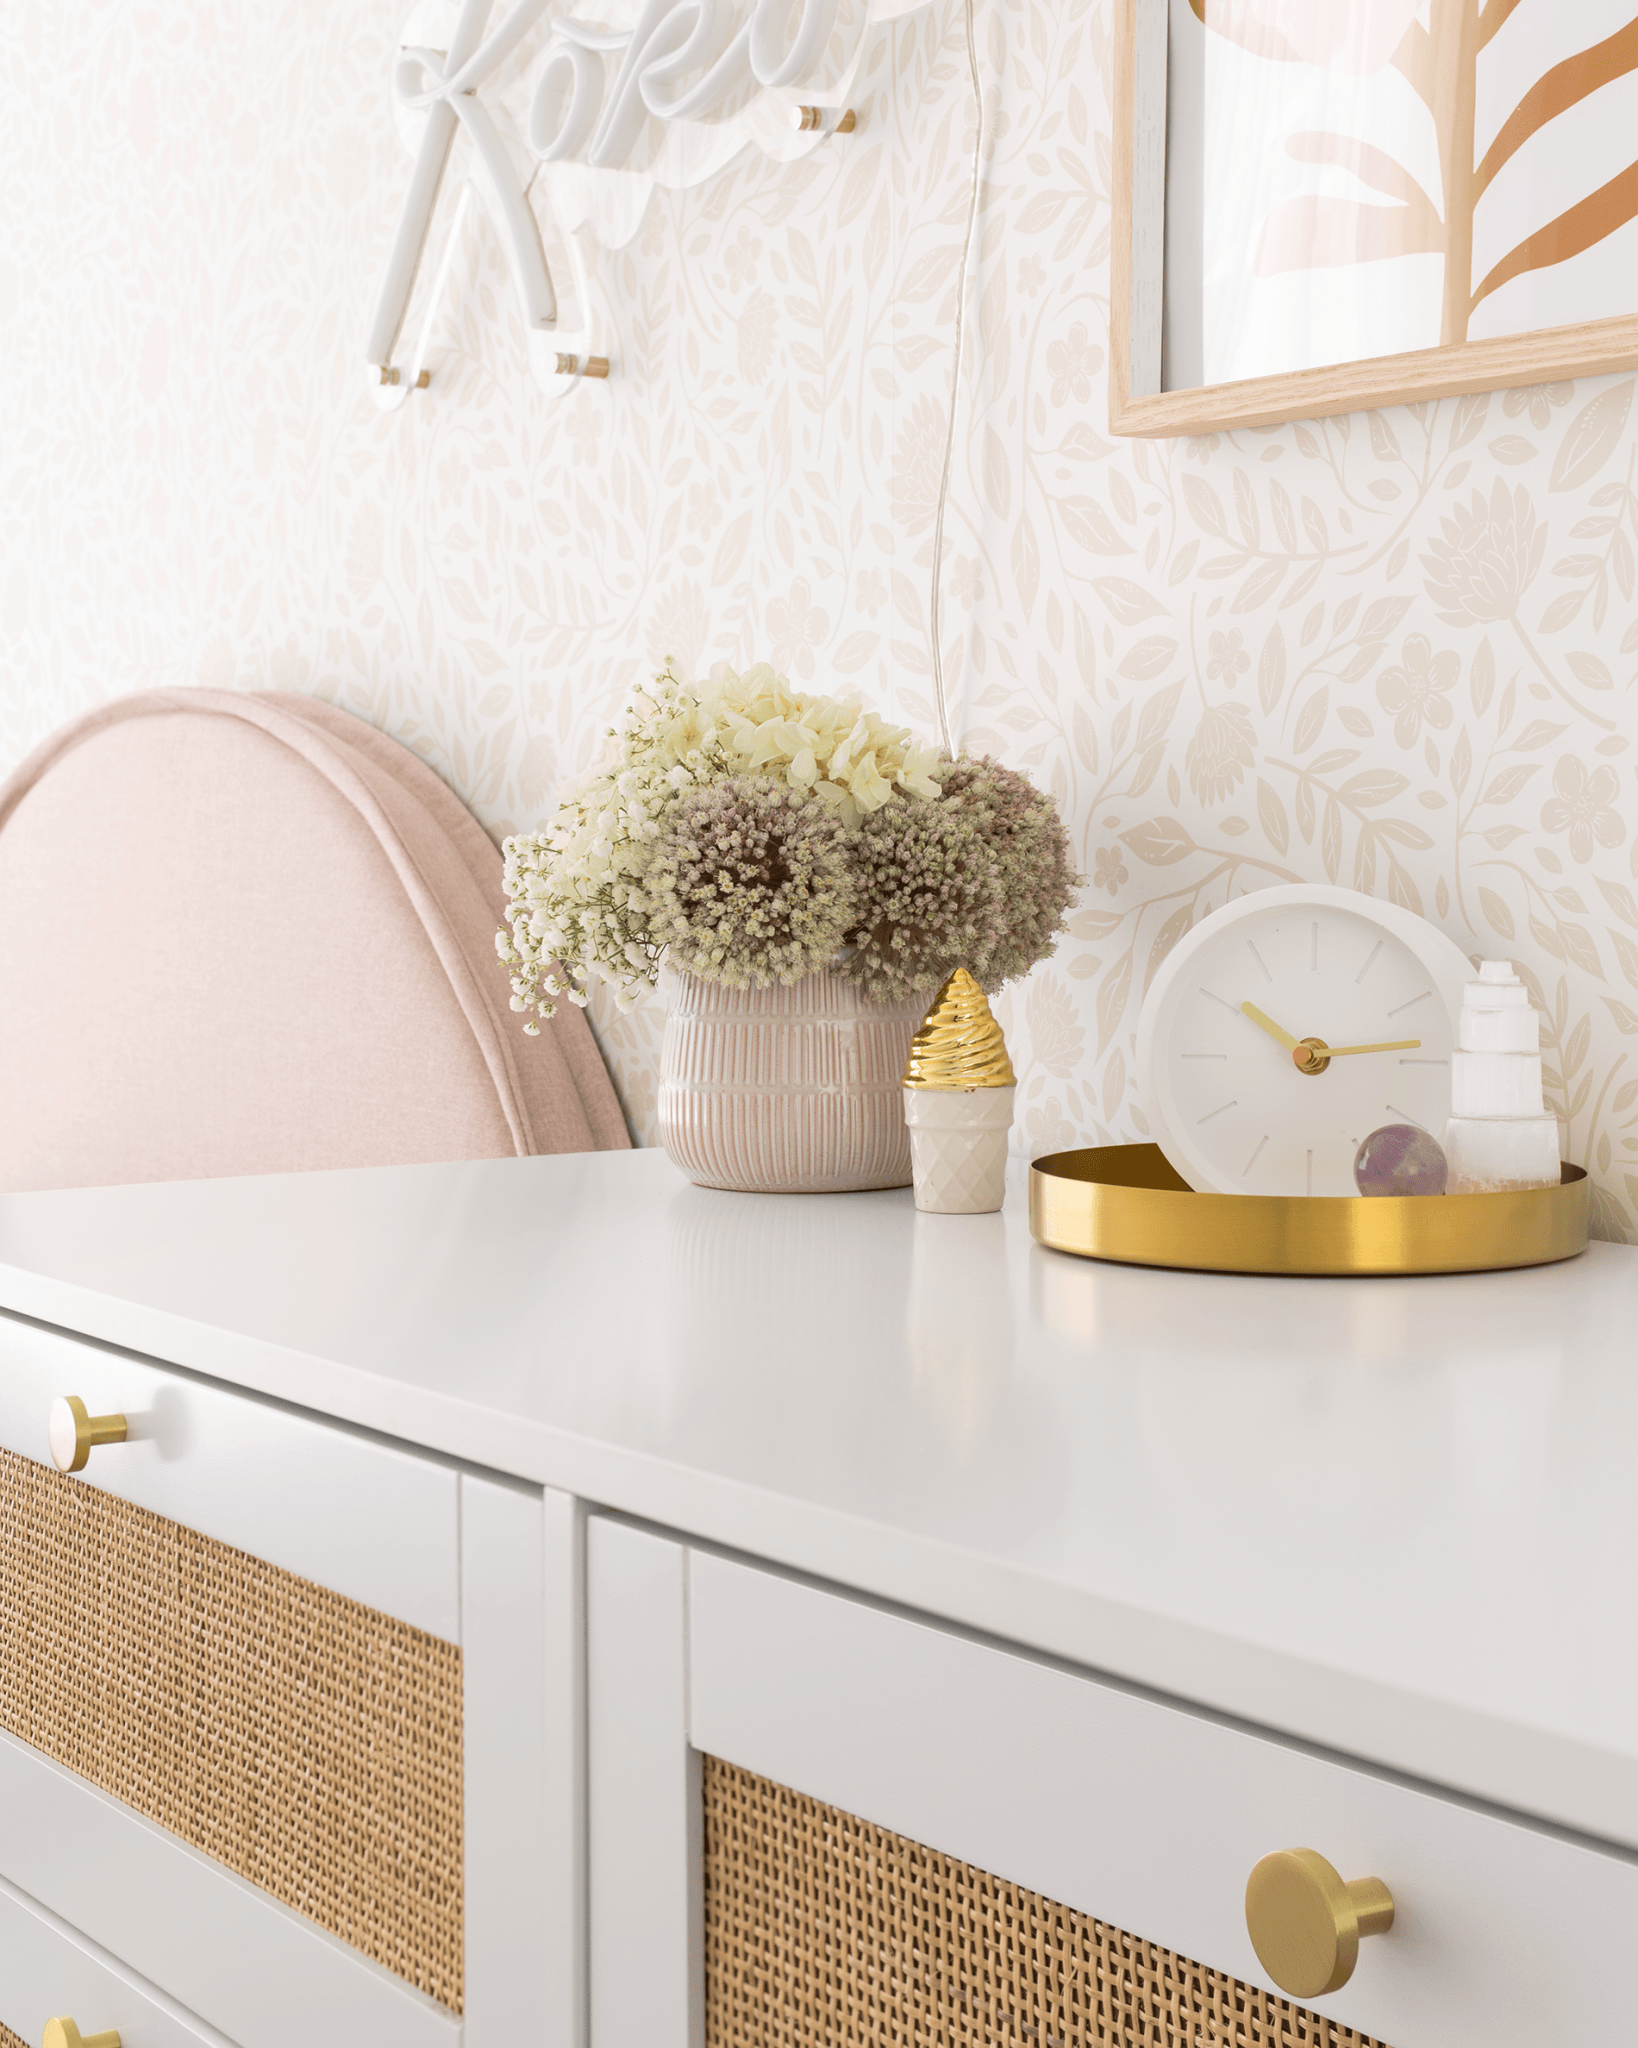 Flower wallpaper behind a white dresser with gold accents